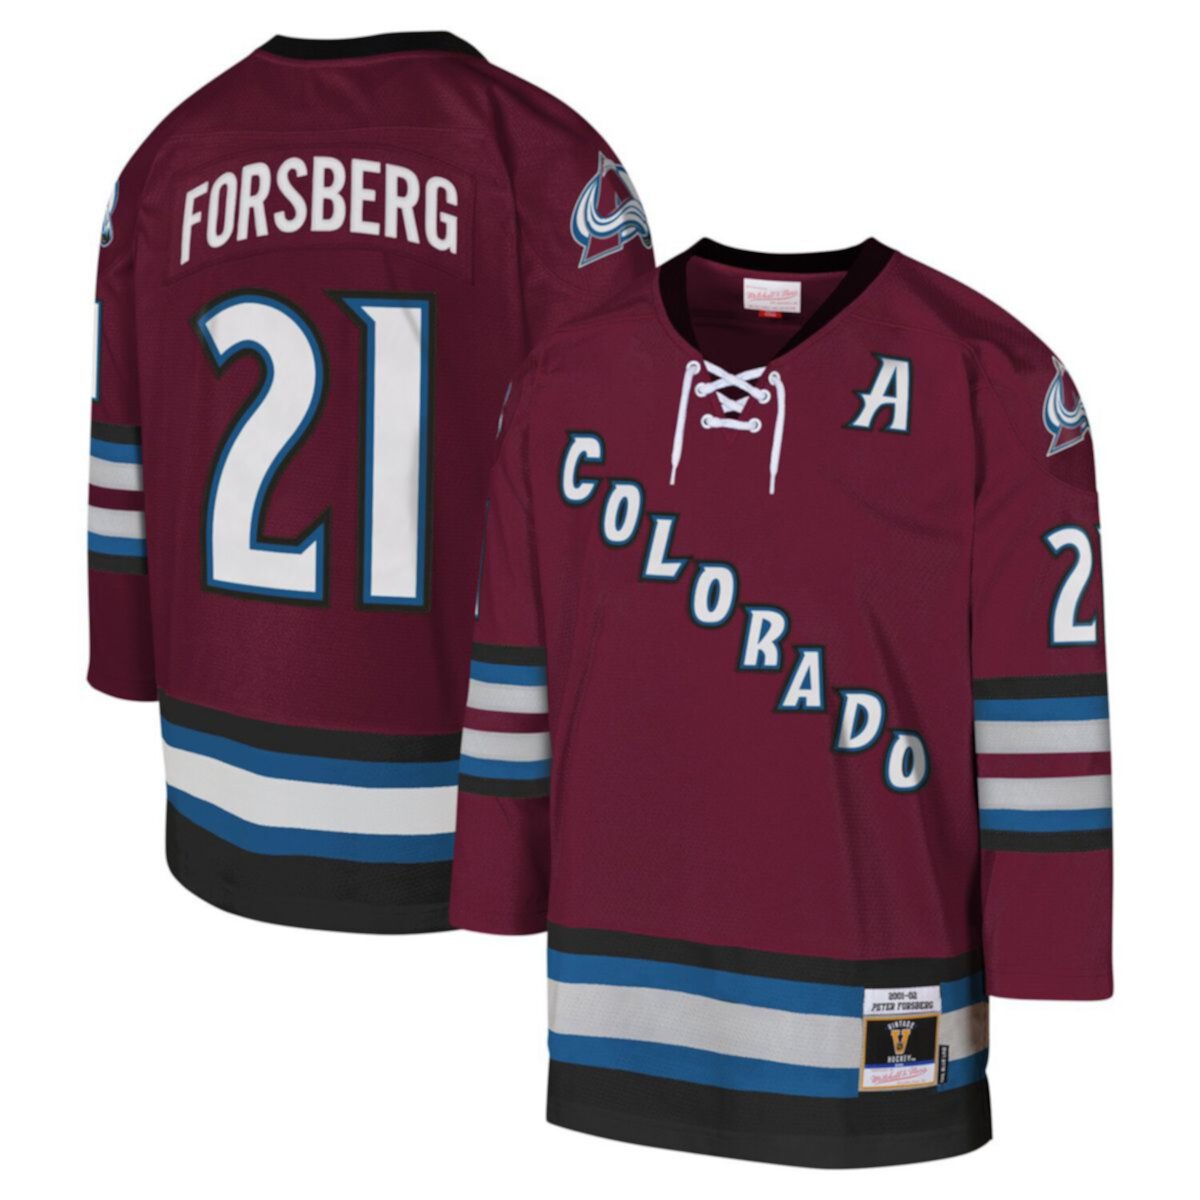 Youth Mitchell & Ness Peter Forsberg Burgundy Colorado Avalanche 2001-02 Blue Line Player Jersey Mitchell & Ness